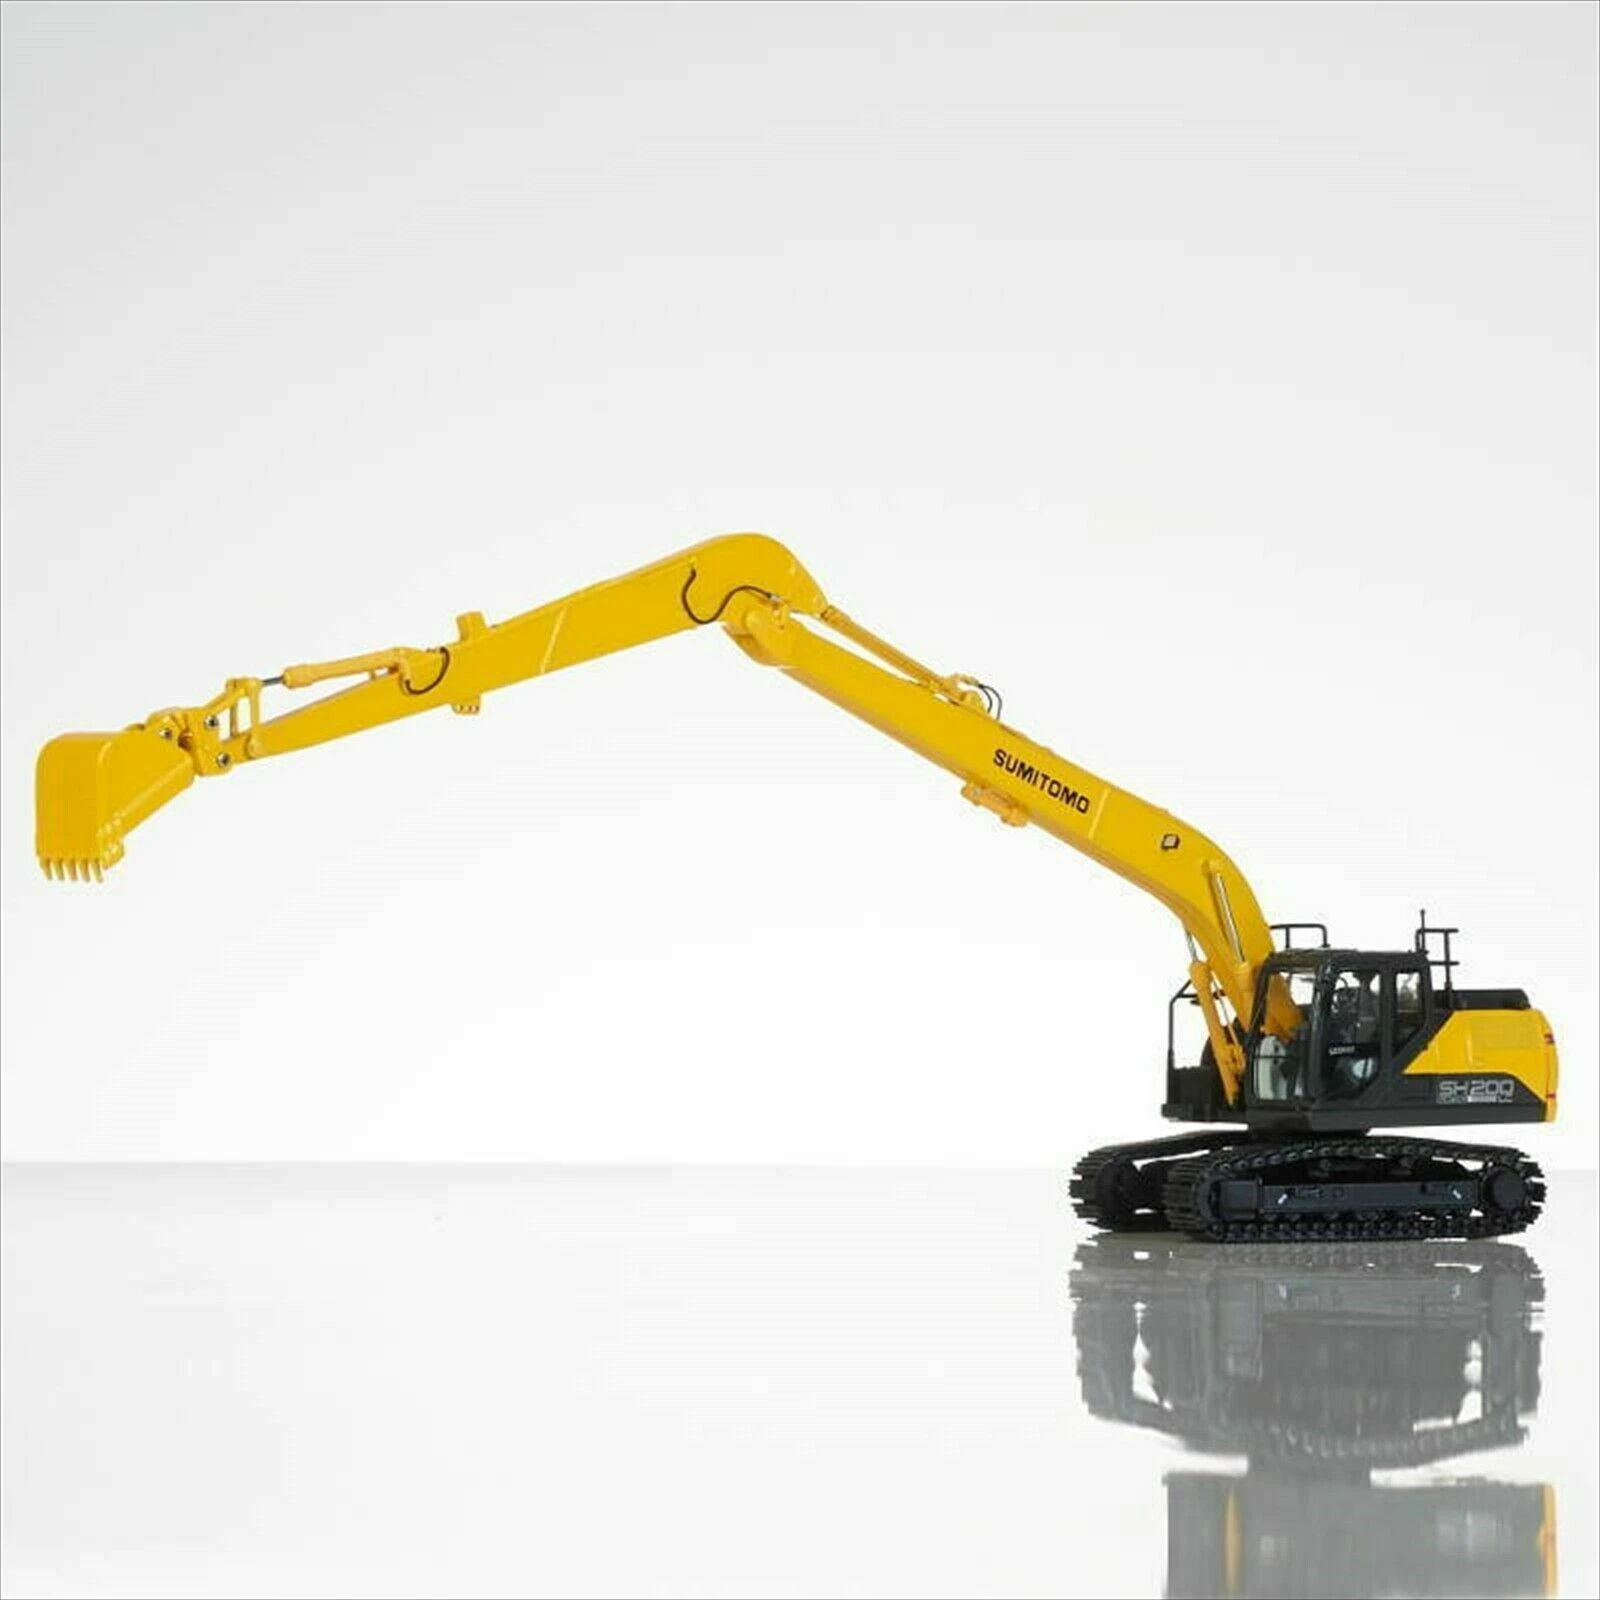 1/50 Scale DieCast Metal Model SH200 Excavator Drill Construction vehicles